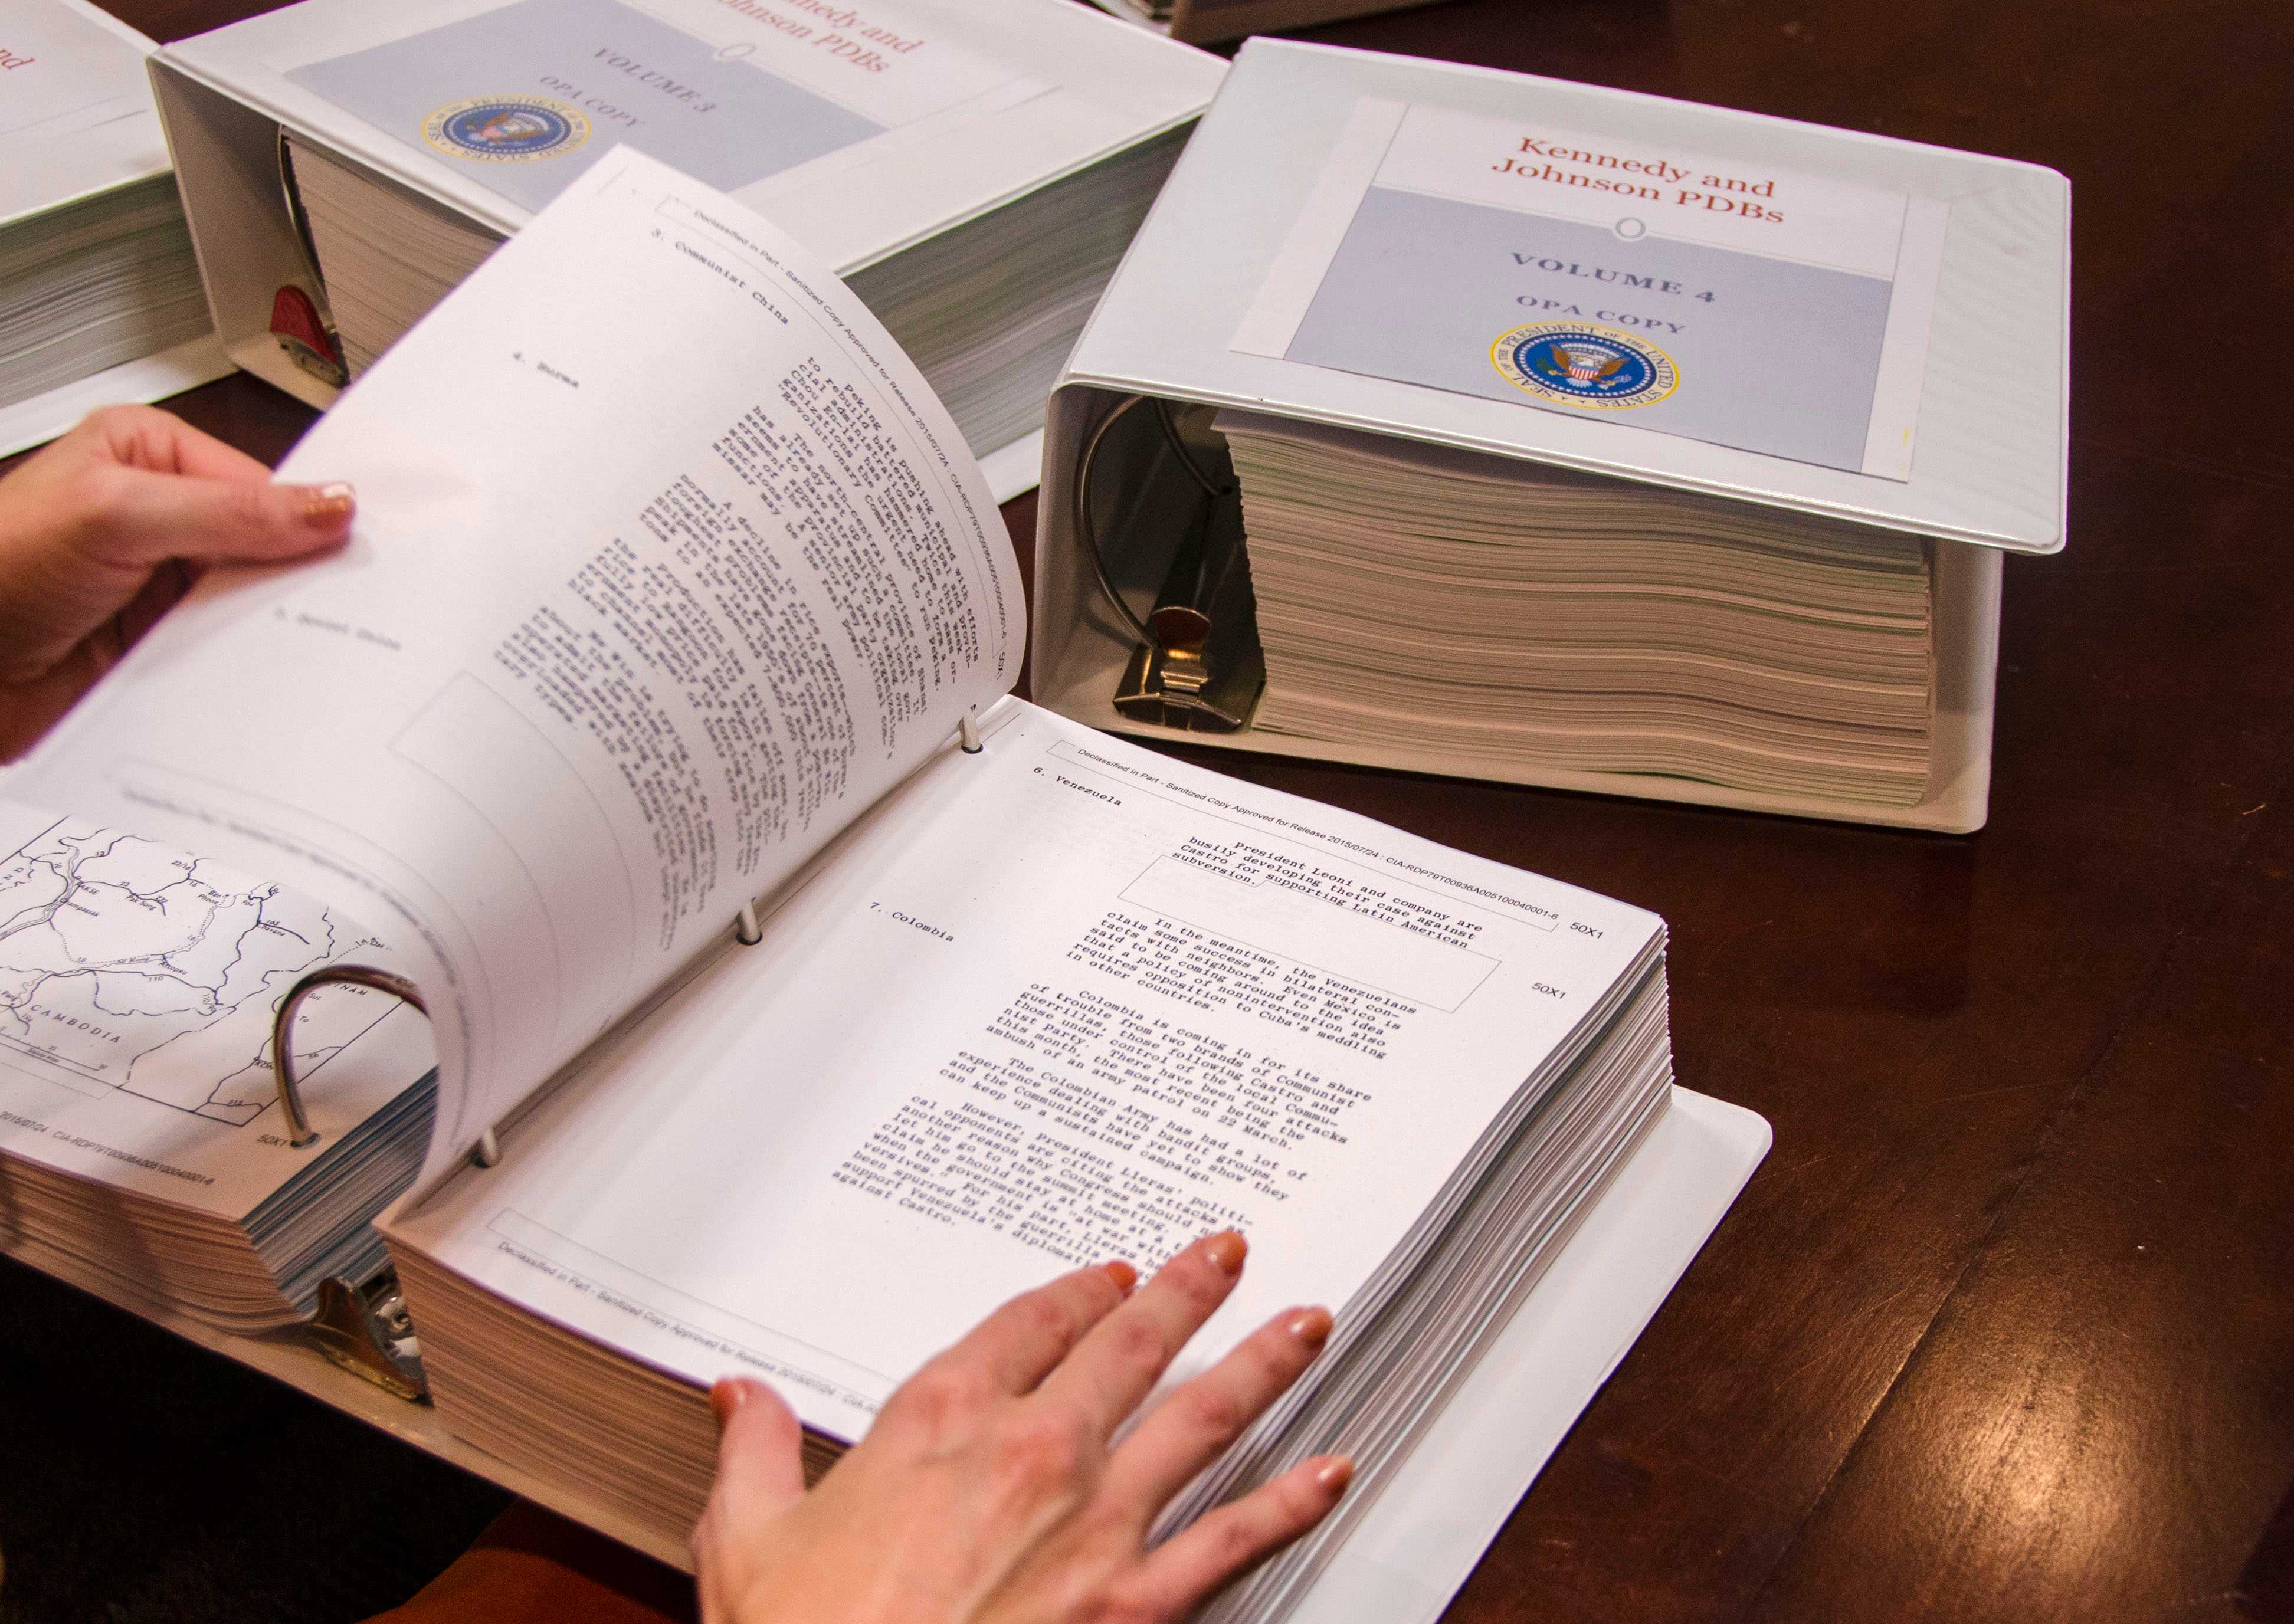 Close-up of hands flipping through large binders of documents with two other binders in the background.